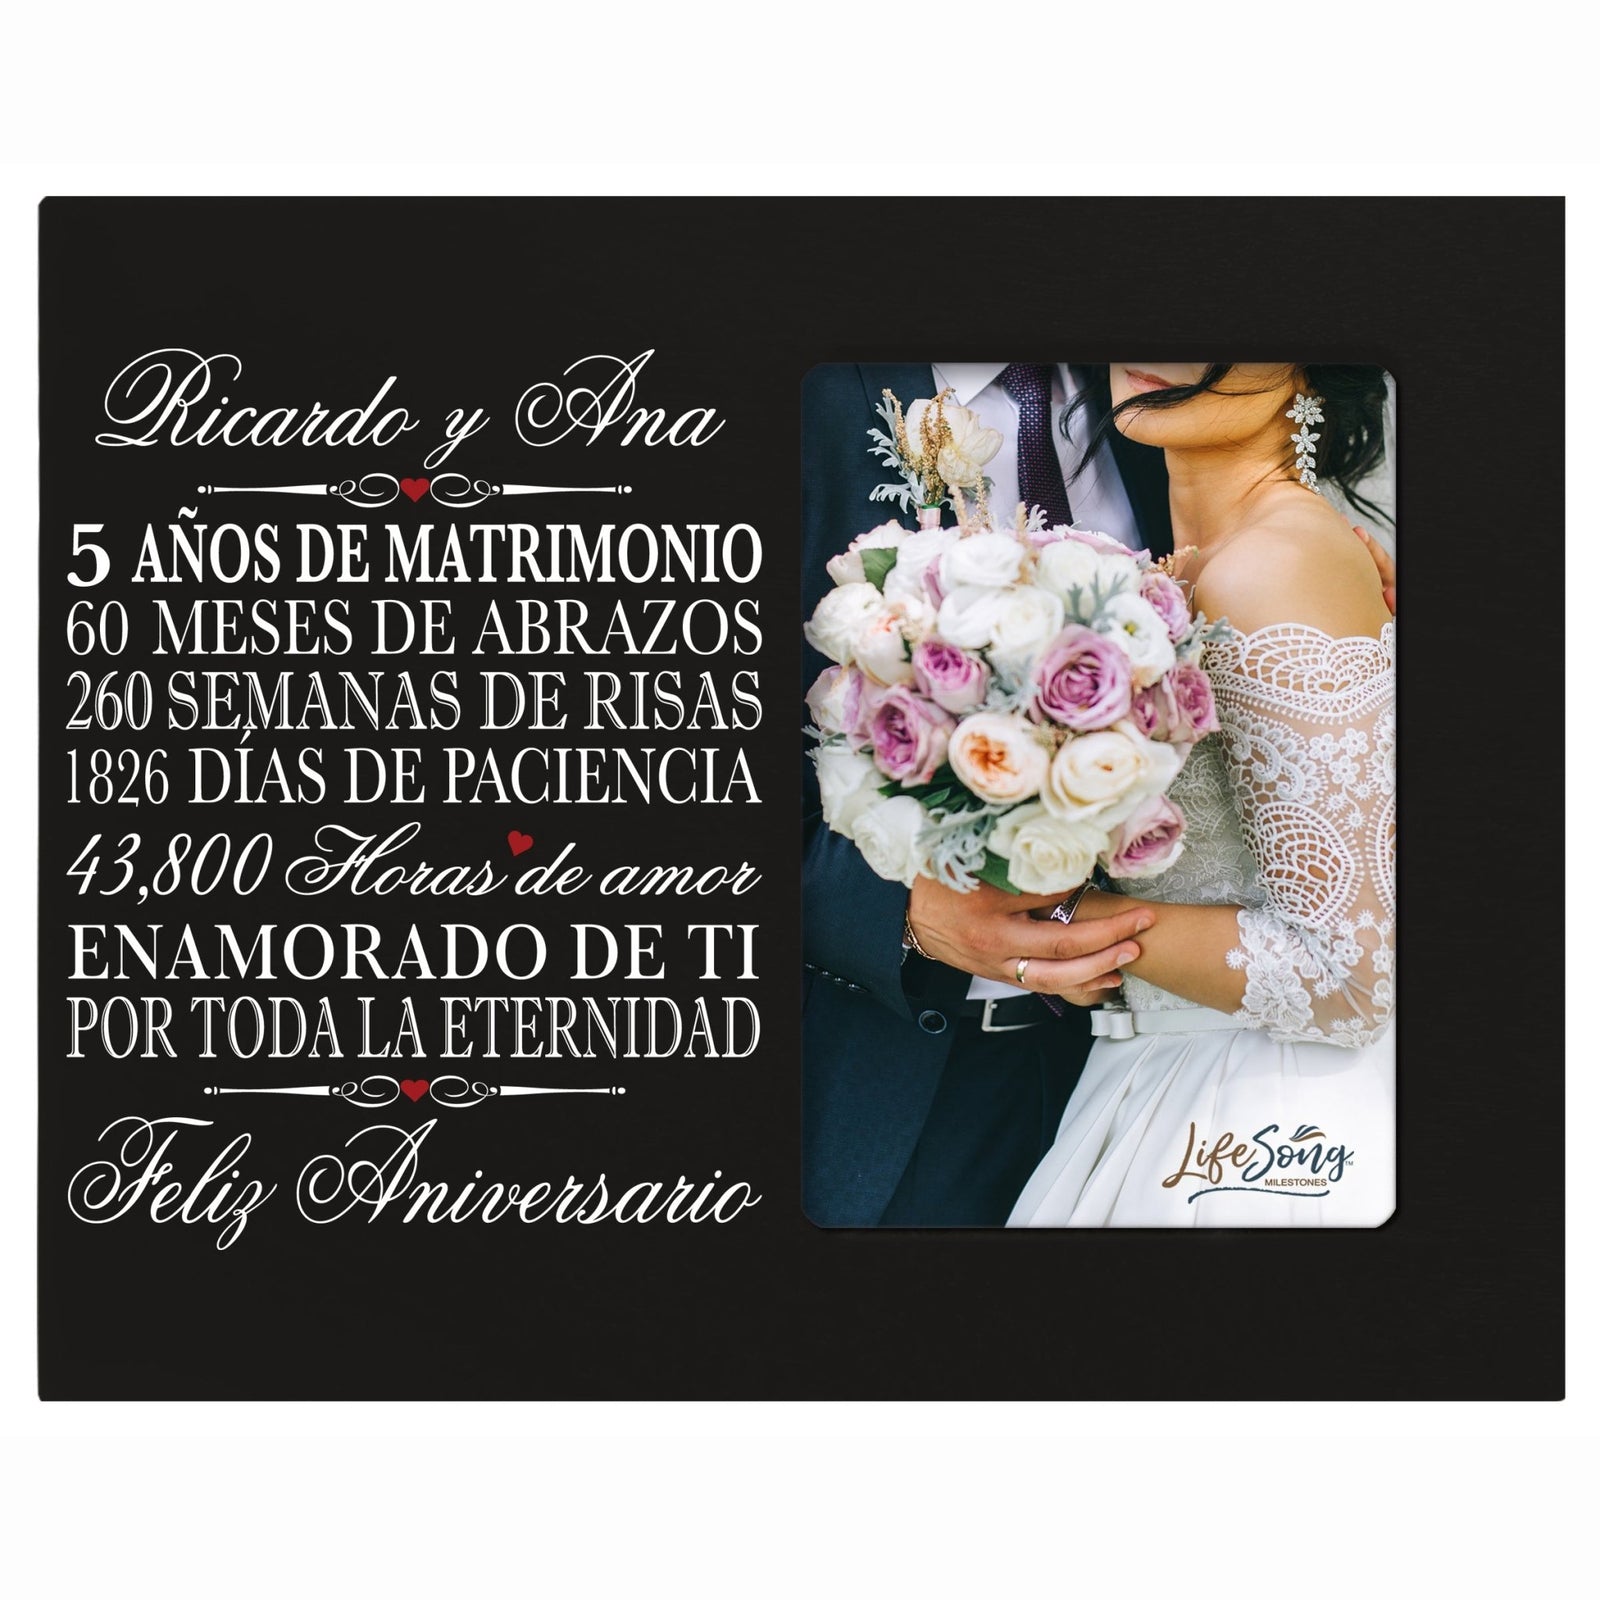 Personalized Anniversary Frames with Spanish Verse - 5th Anniversary - LifeSong Milestones